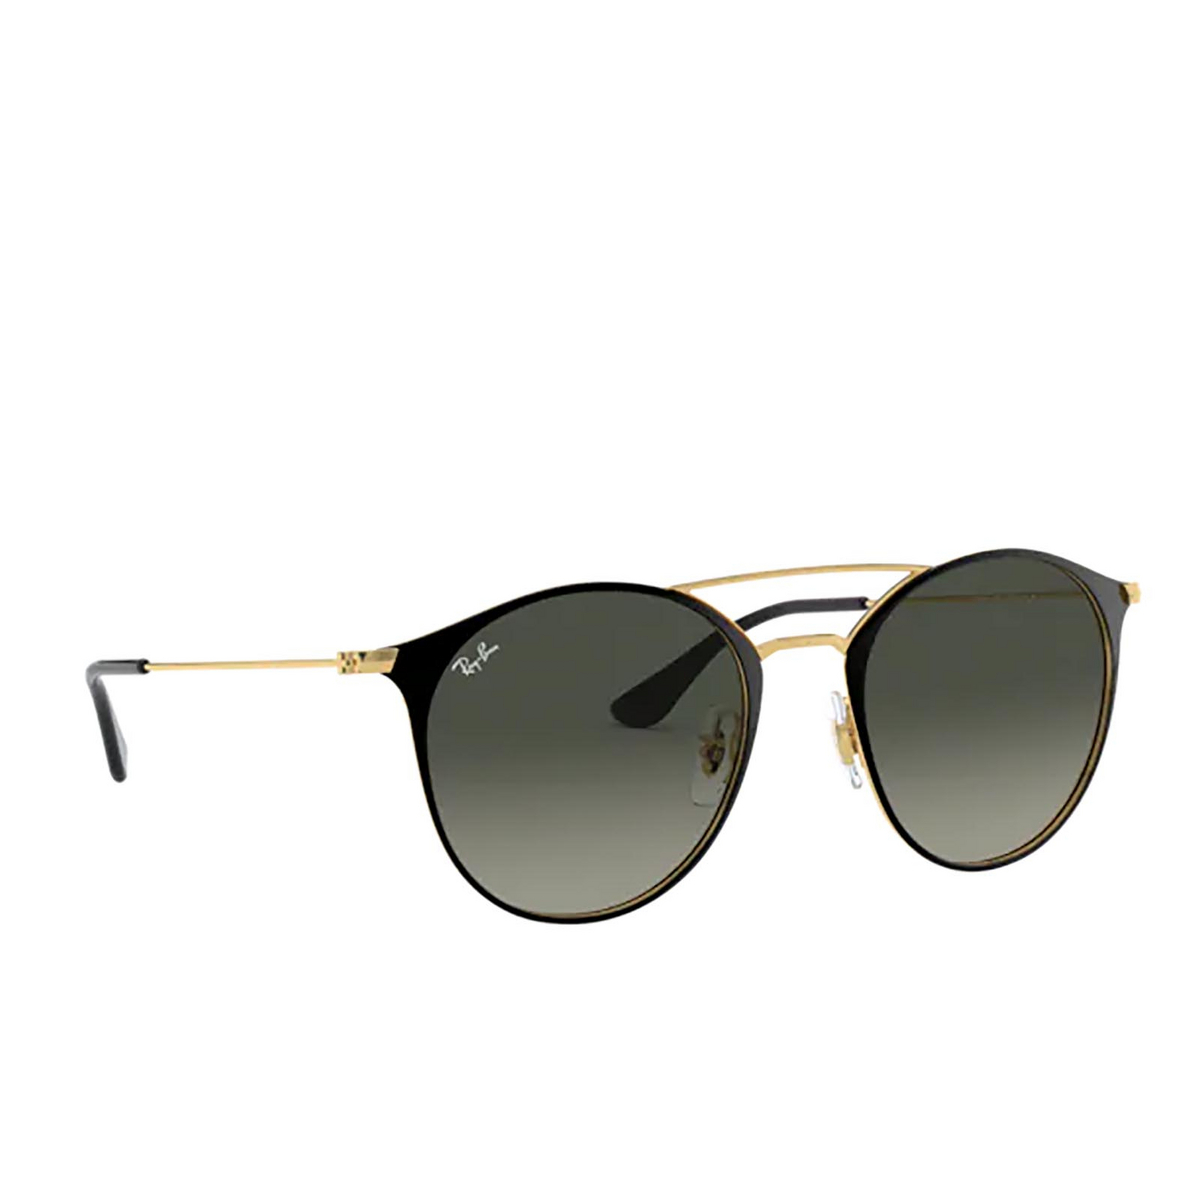 Ray-Ban® Round Sunglasses: RB3546 color Black On Arista 187/71 - three-quarters view.